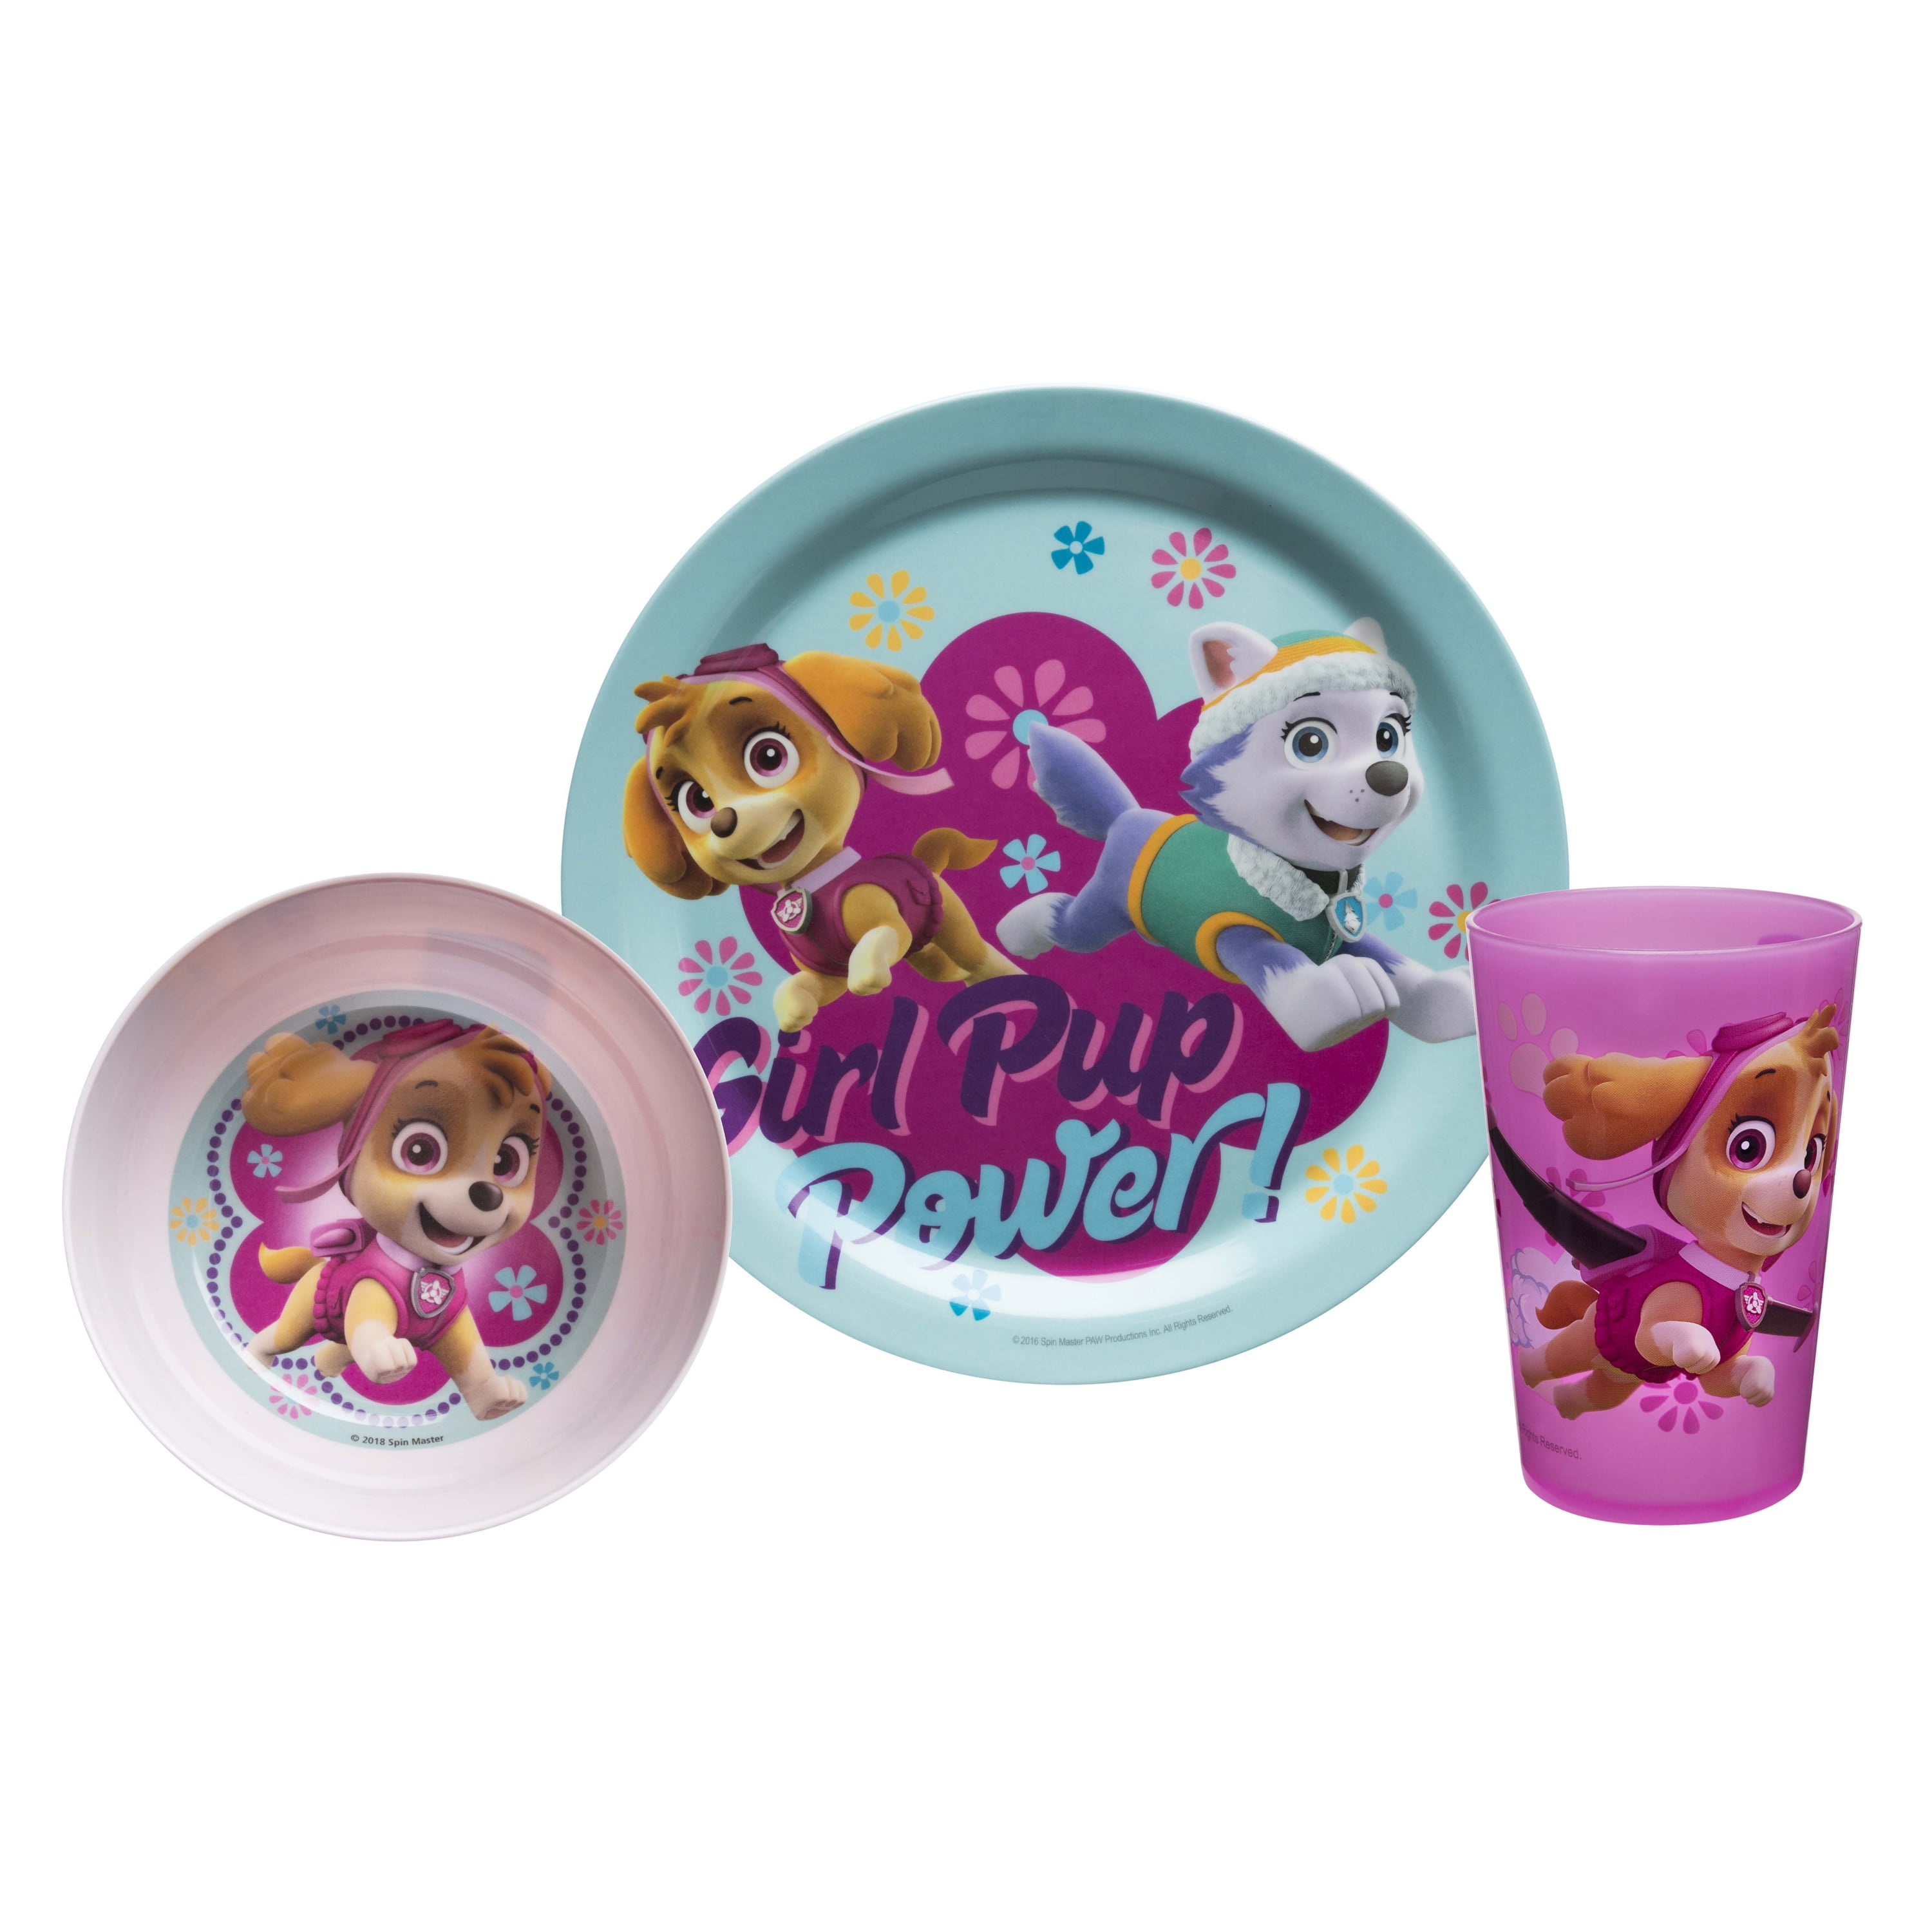 Details about   3 Pieces Kids Micro Dining Set Plate,Cup Utensils Paw Patrol Breakfast Dinner